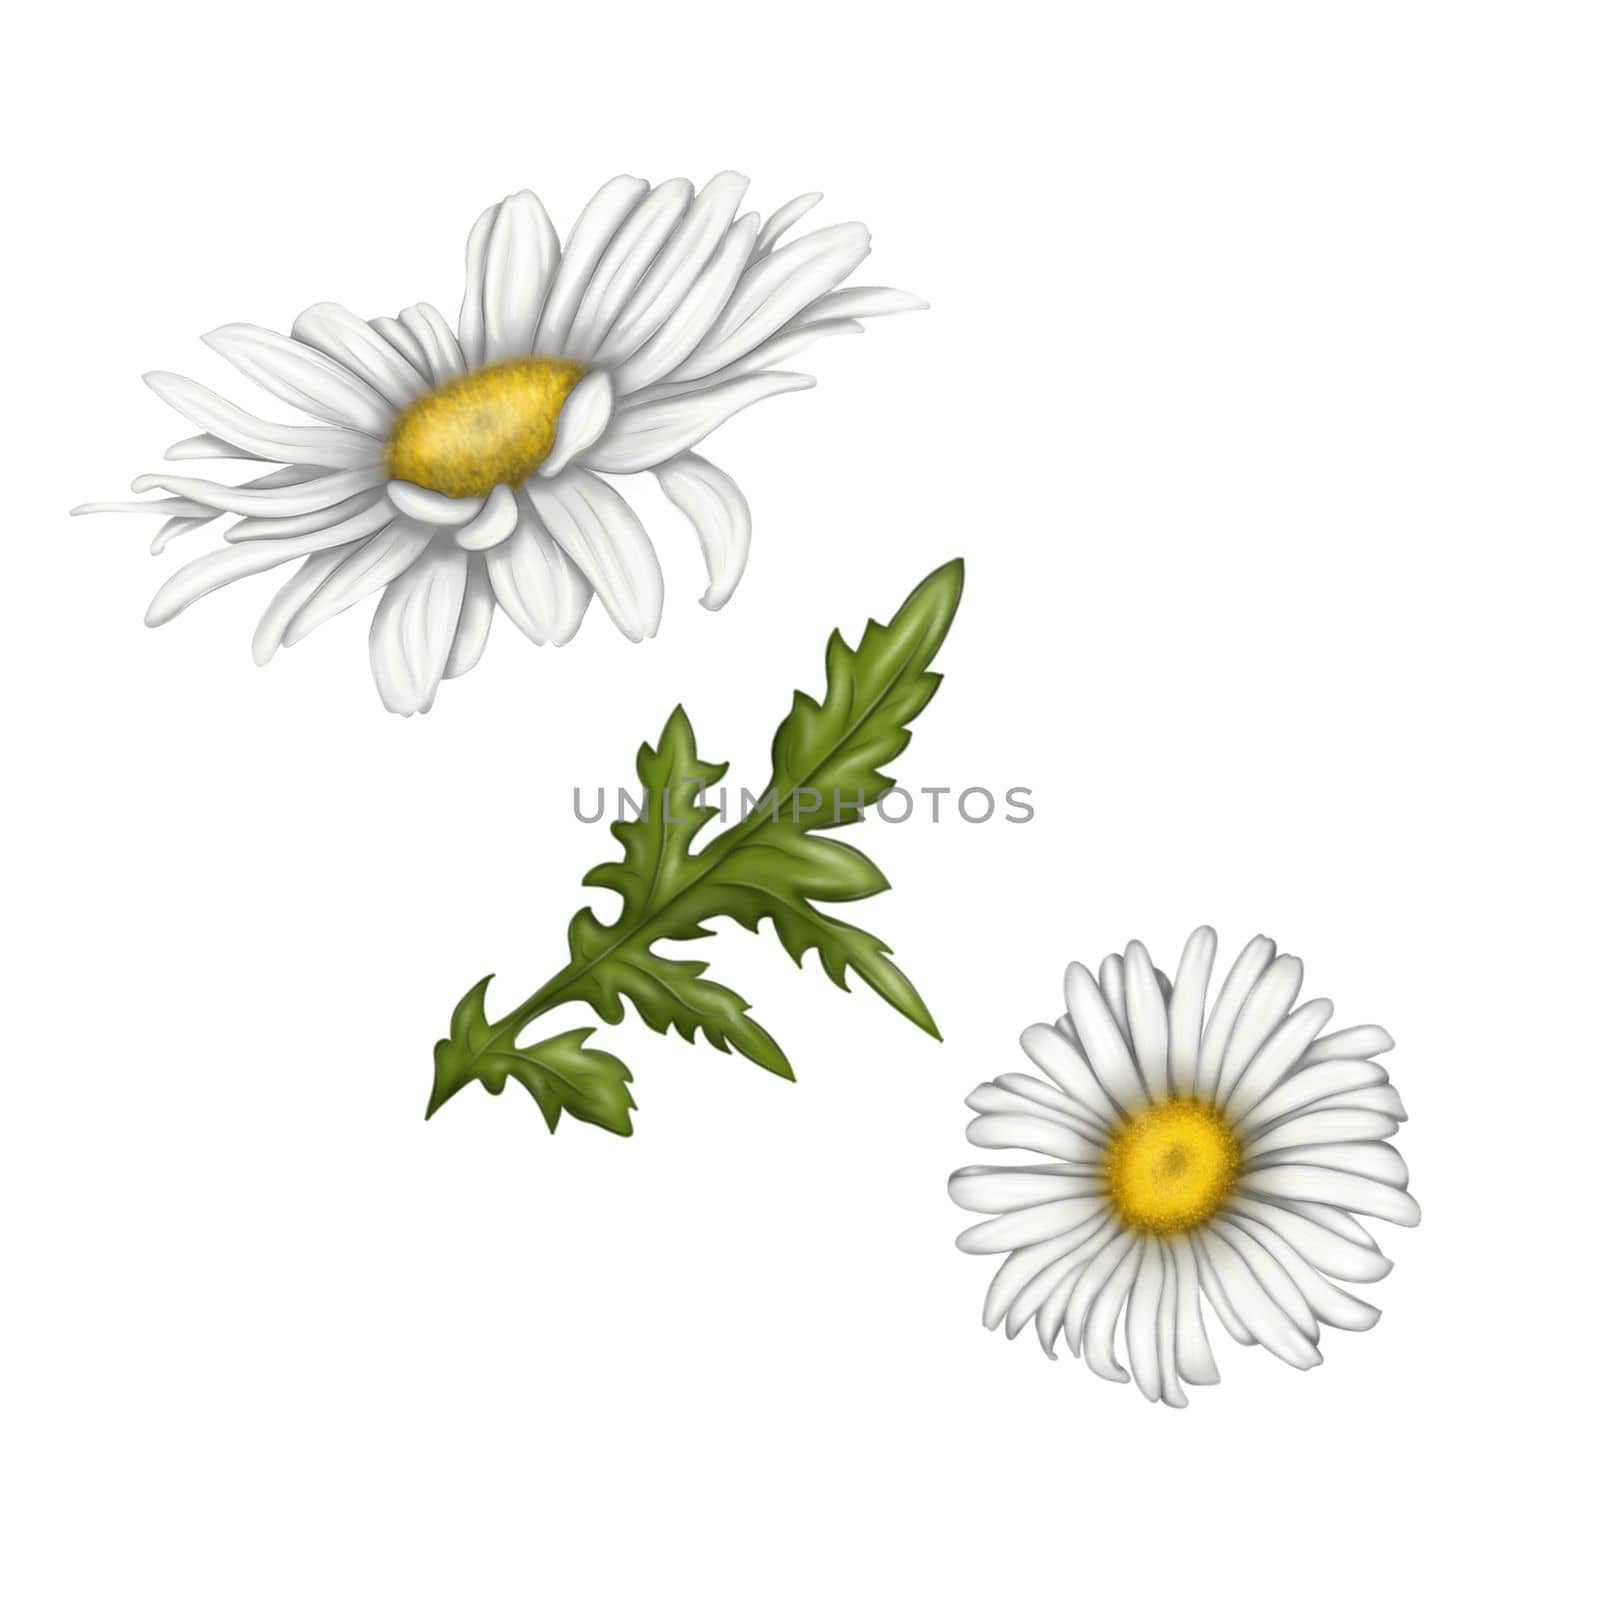 Illustration of chamomile flowers on an isolated background. Bright beautiful summer flowers. print, illustration by Alina_Lebed